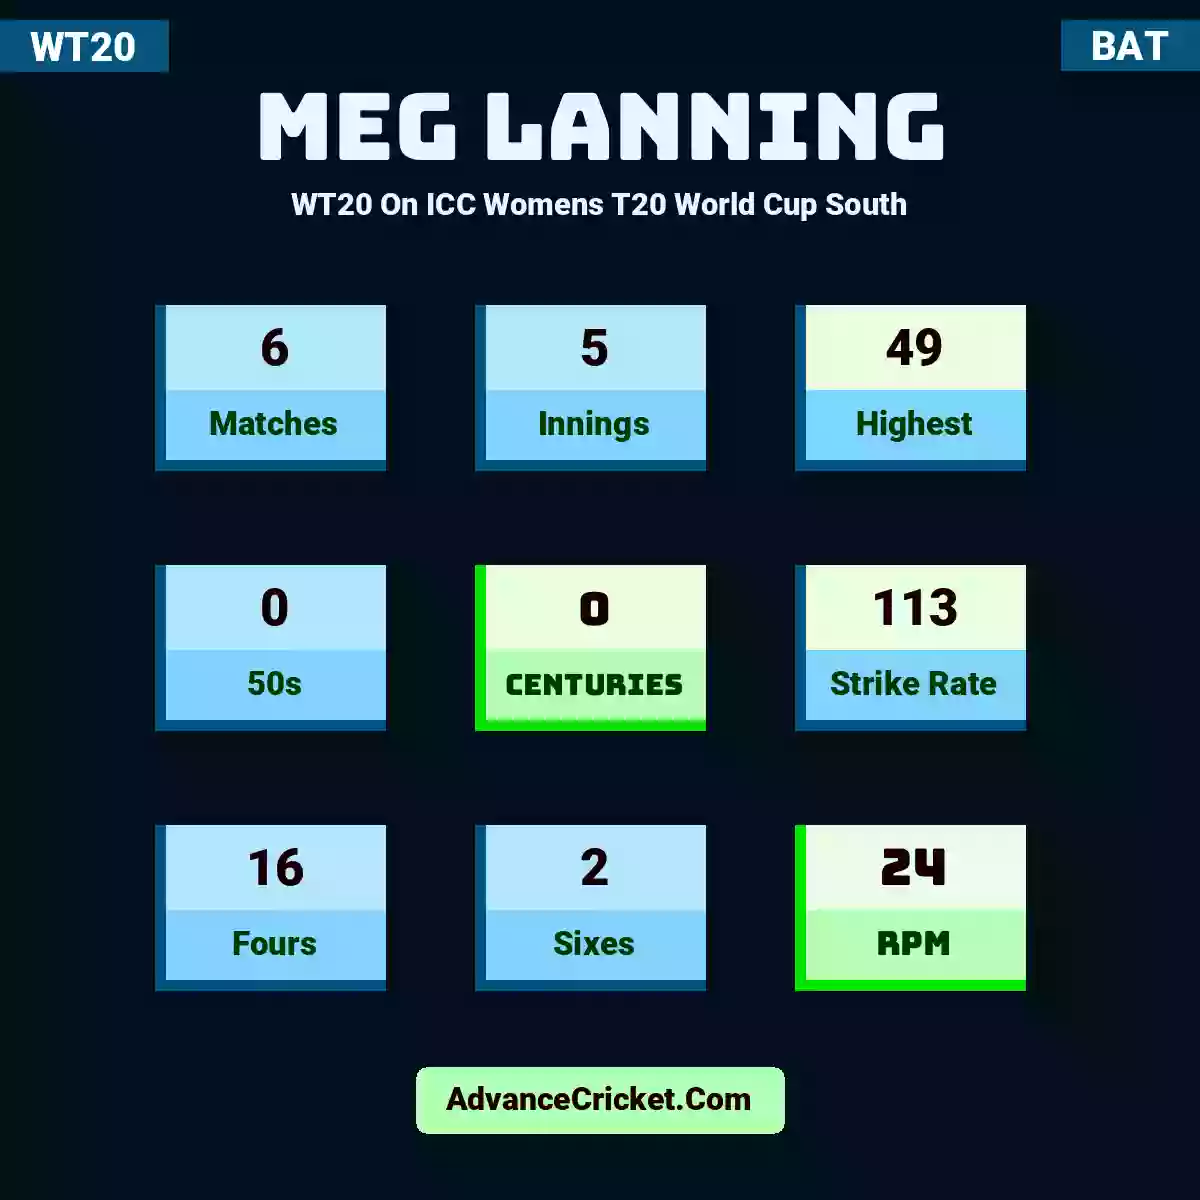 Meg Lanning WT20  On ICC Womens T20 World Cup South, Meg Lanning played 6 matches, scored 49 runs as highest, 0 half-centuries, and 0 centuries, with a strike rate of 113. M.Lanning hit 16 fours and 2 sixes, with an RPM of 24.